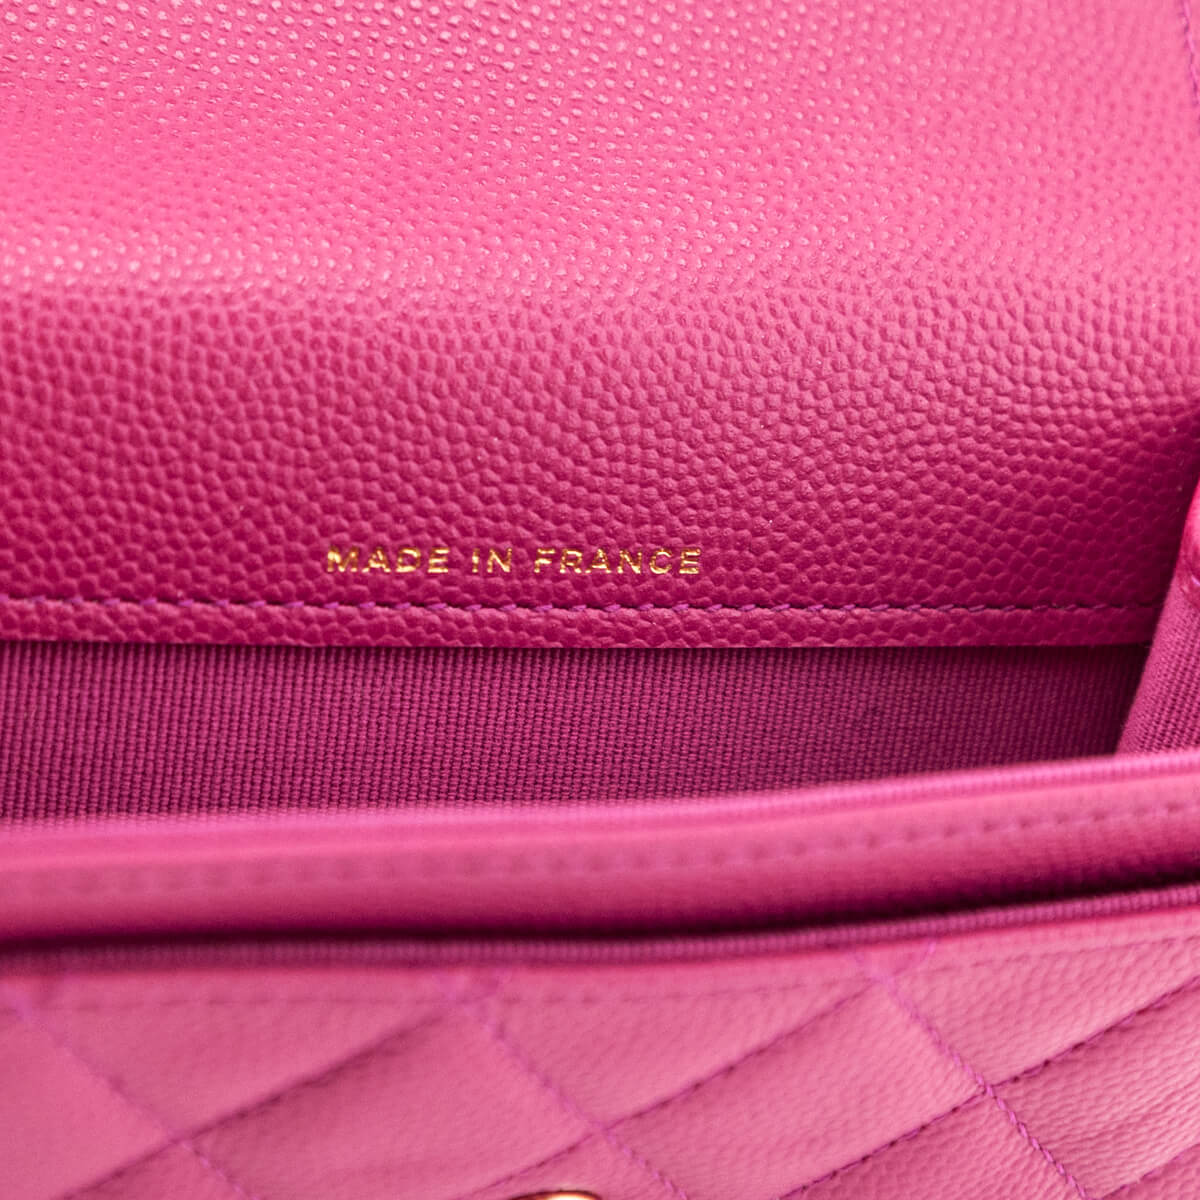 Chanel Pink Quilted Caviar Flap Card Holder - Love that Bag etc - Preowned Authentic Designer Handbags & Preloved Fashions